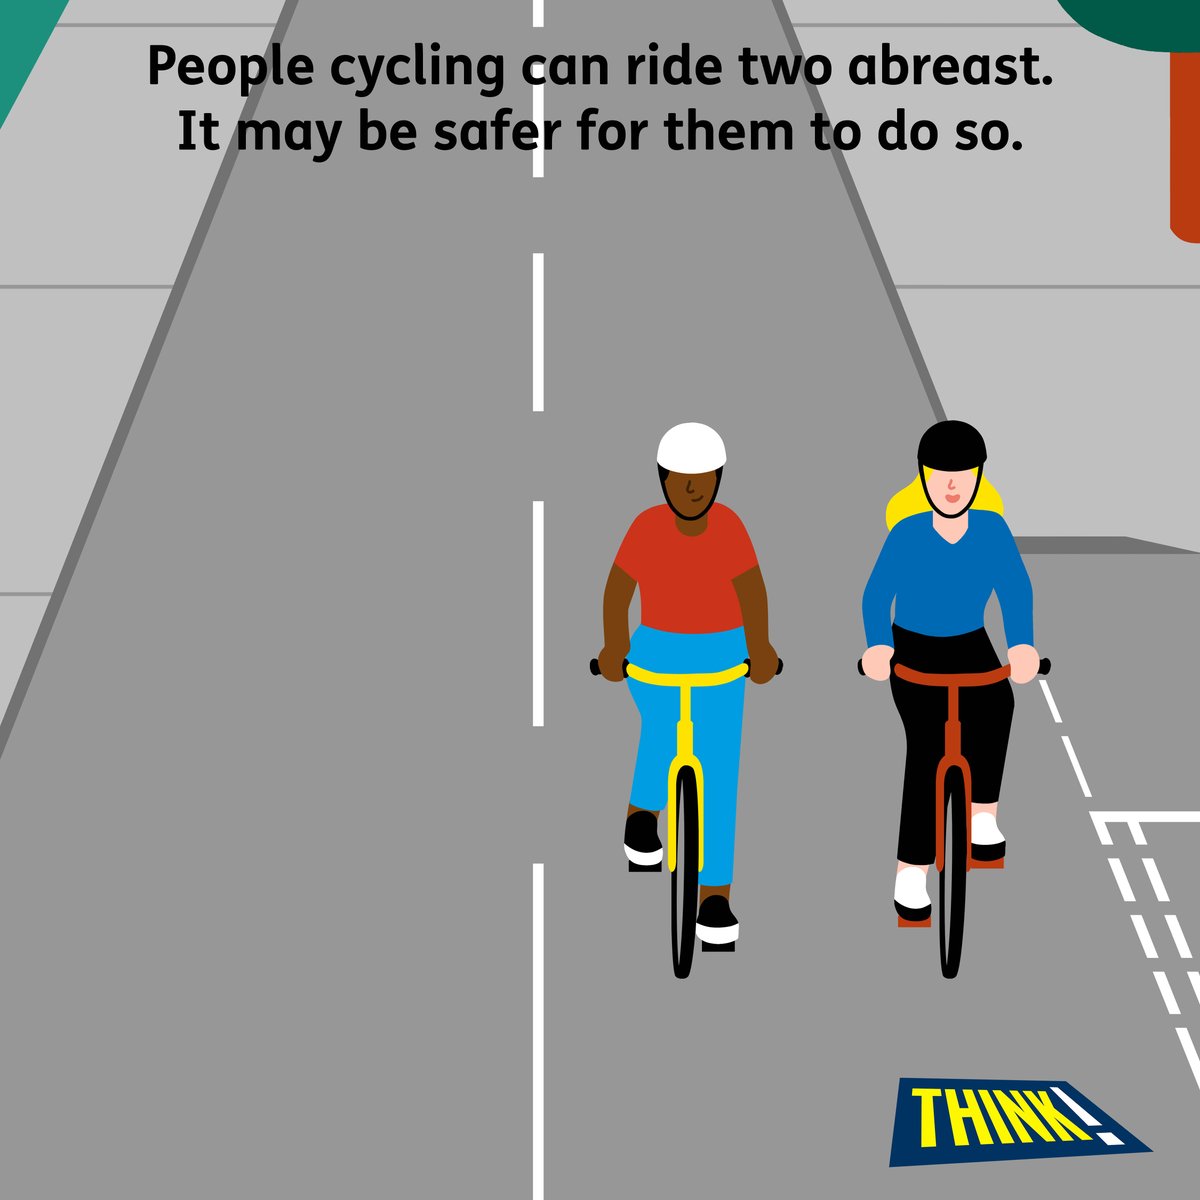 It’s #HighwayCode reminder time! 🔔 Remember, people cycling can ride two abreast. It may be safer for them to do so. Refresh your Highway Code knowledge and help keep everyone safe: gov.uk/government/new…